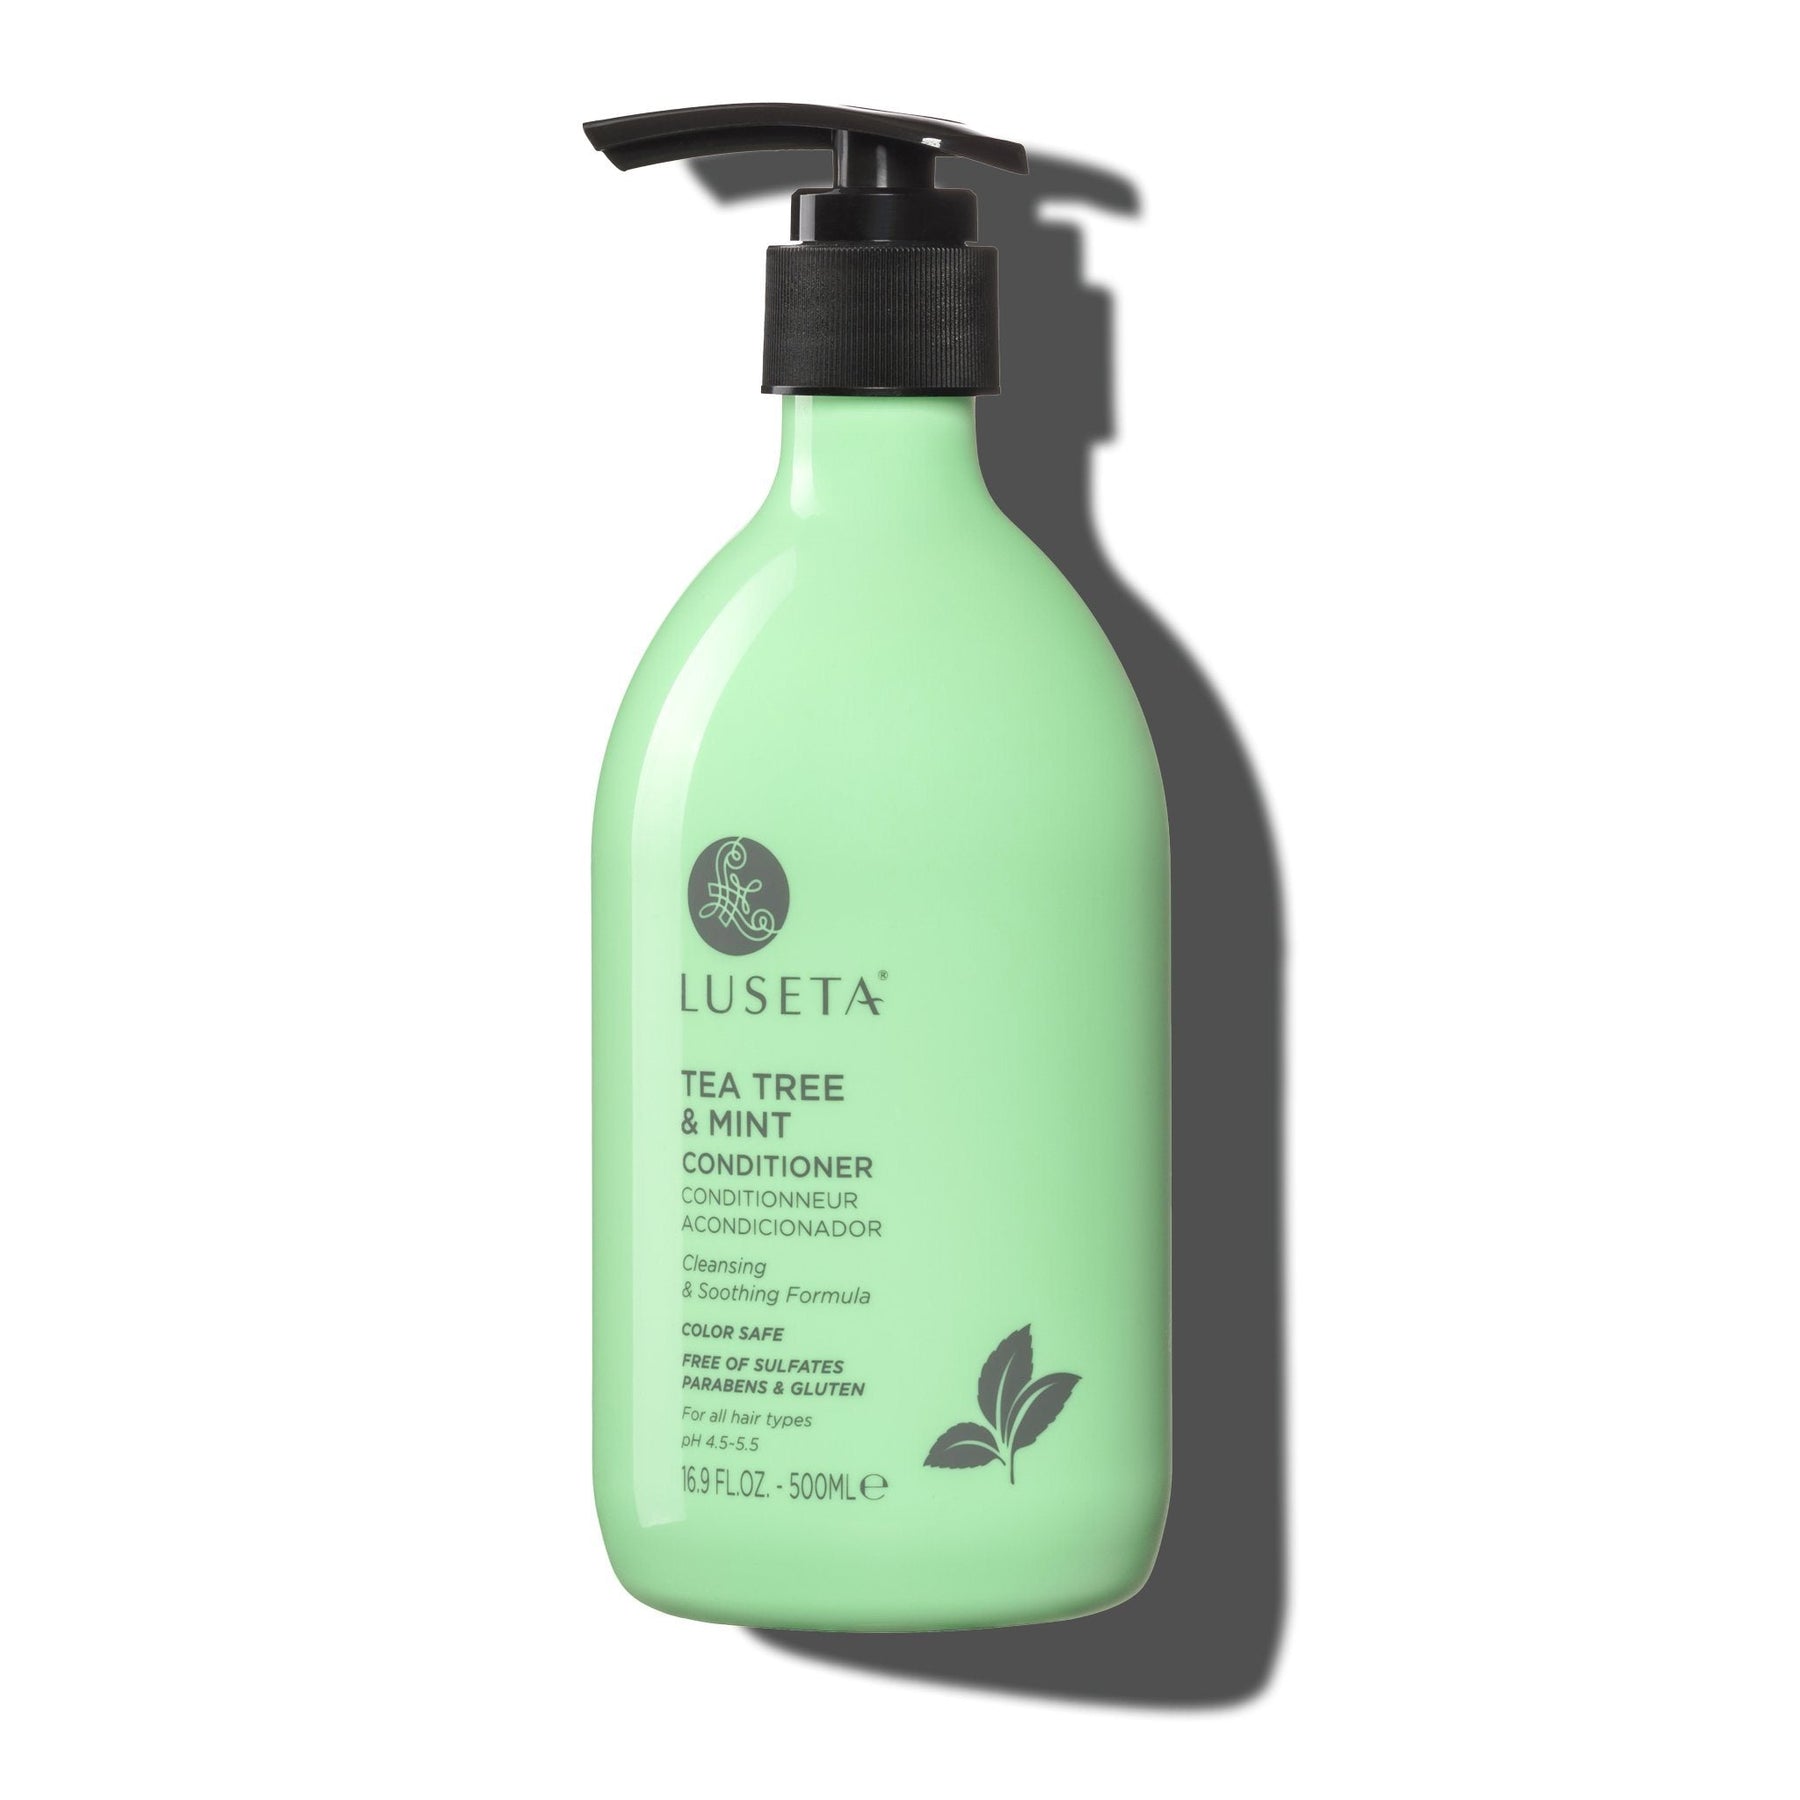 Tea Tree & Mint Conditioner - by Luseta Beauty |ProCare Outlet|